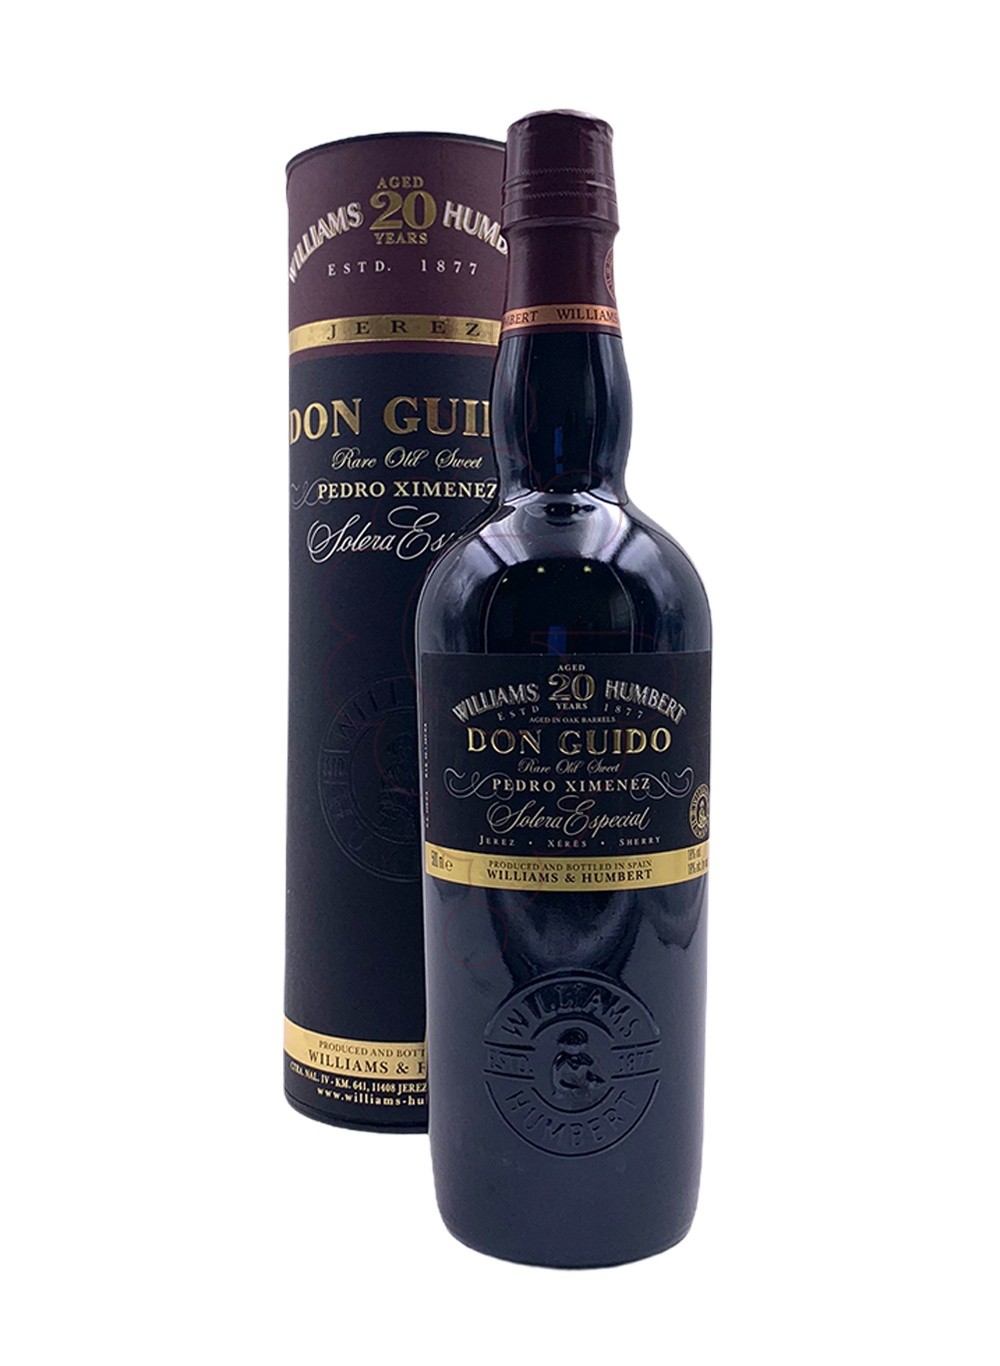 Photo PX Don Guido 20 Years fortified wine